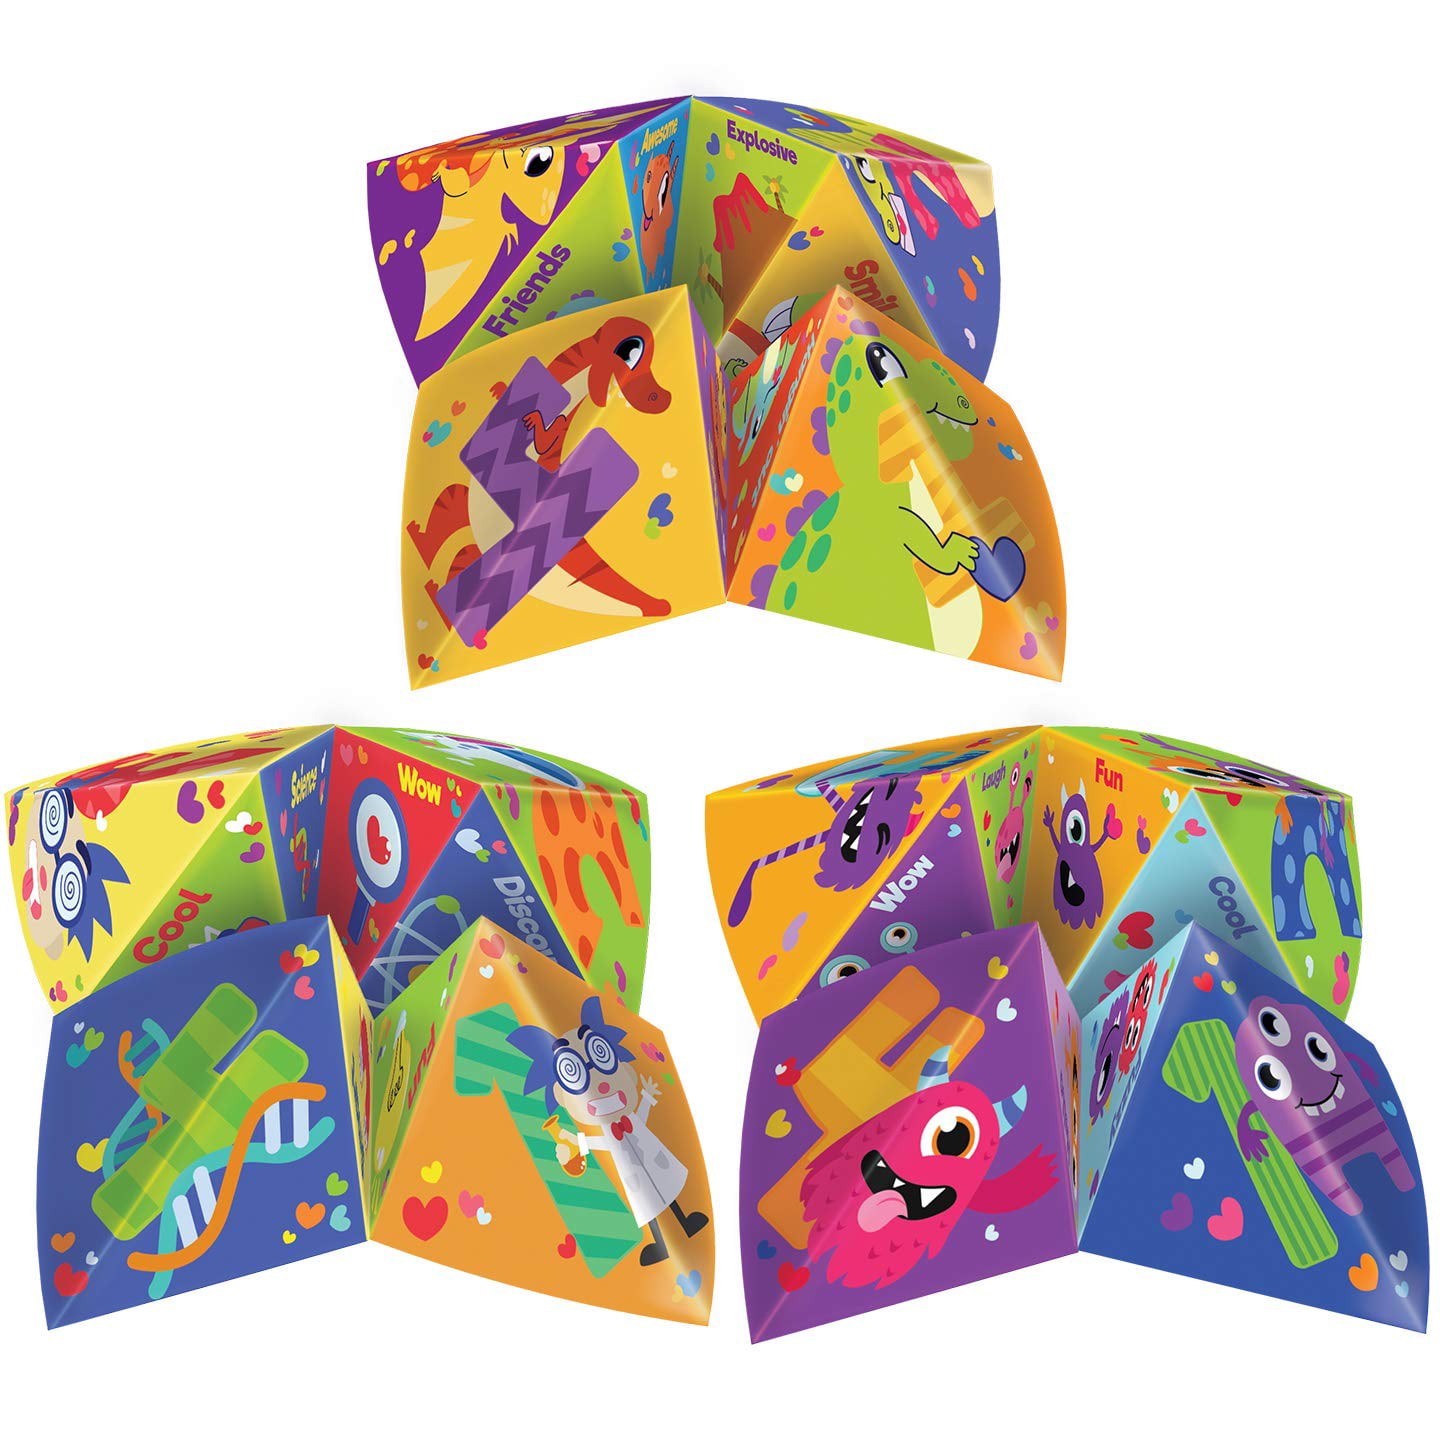 School Classroom Games Great for Kids Card Games Joyin Inc Giveaways Goodies Treats and Family Activity 42 Valentines Day Cootie Catcher Cards Game with Envelopes Love Party Favors Supplies